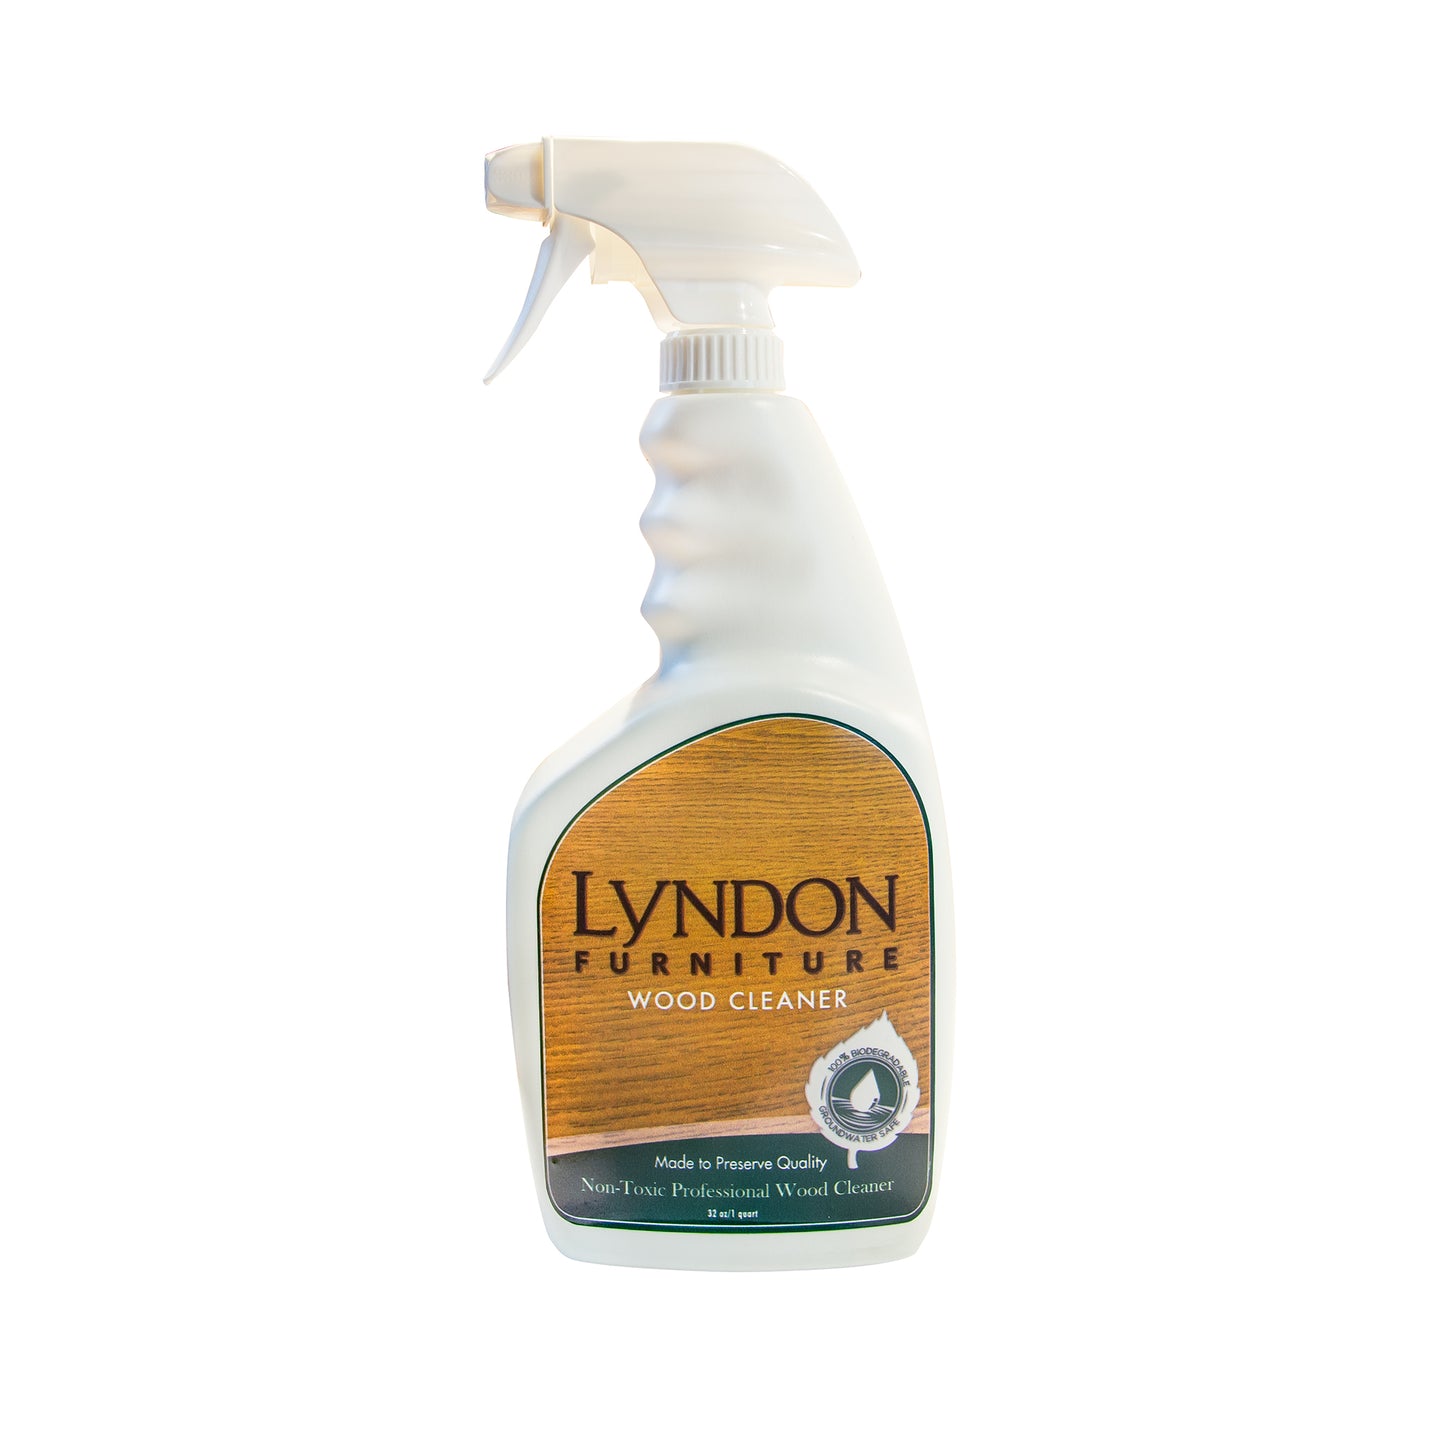 A bottle of lyndon furniture cleaner on a white background.